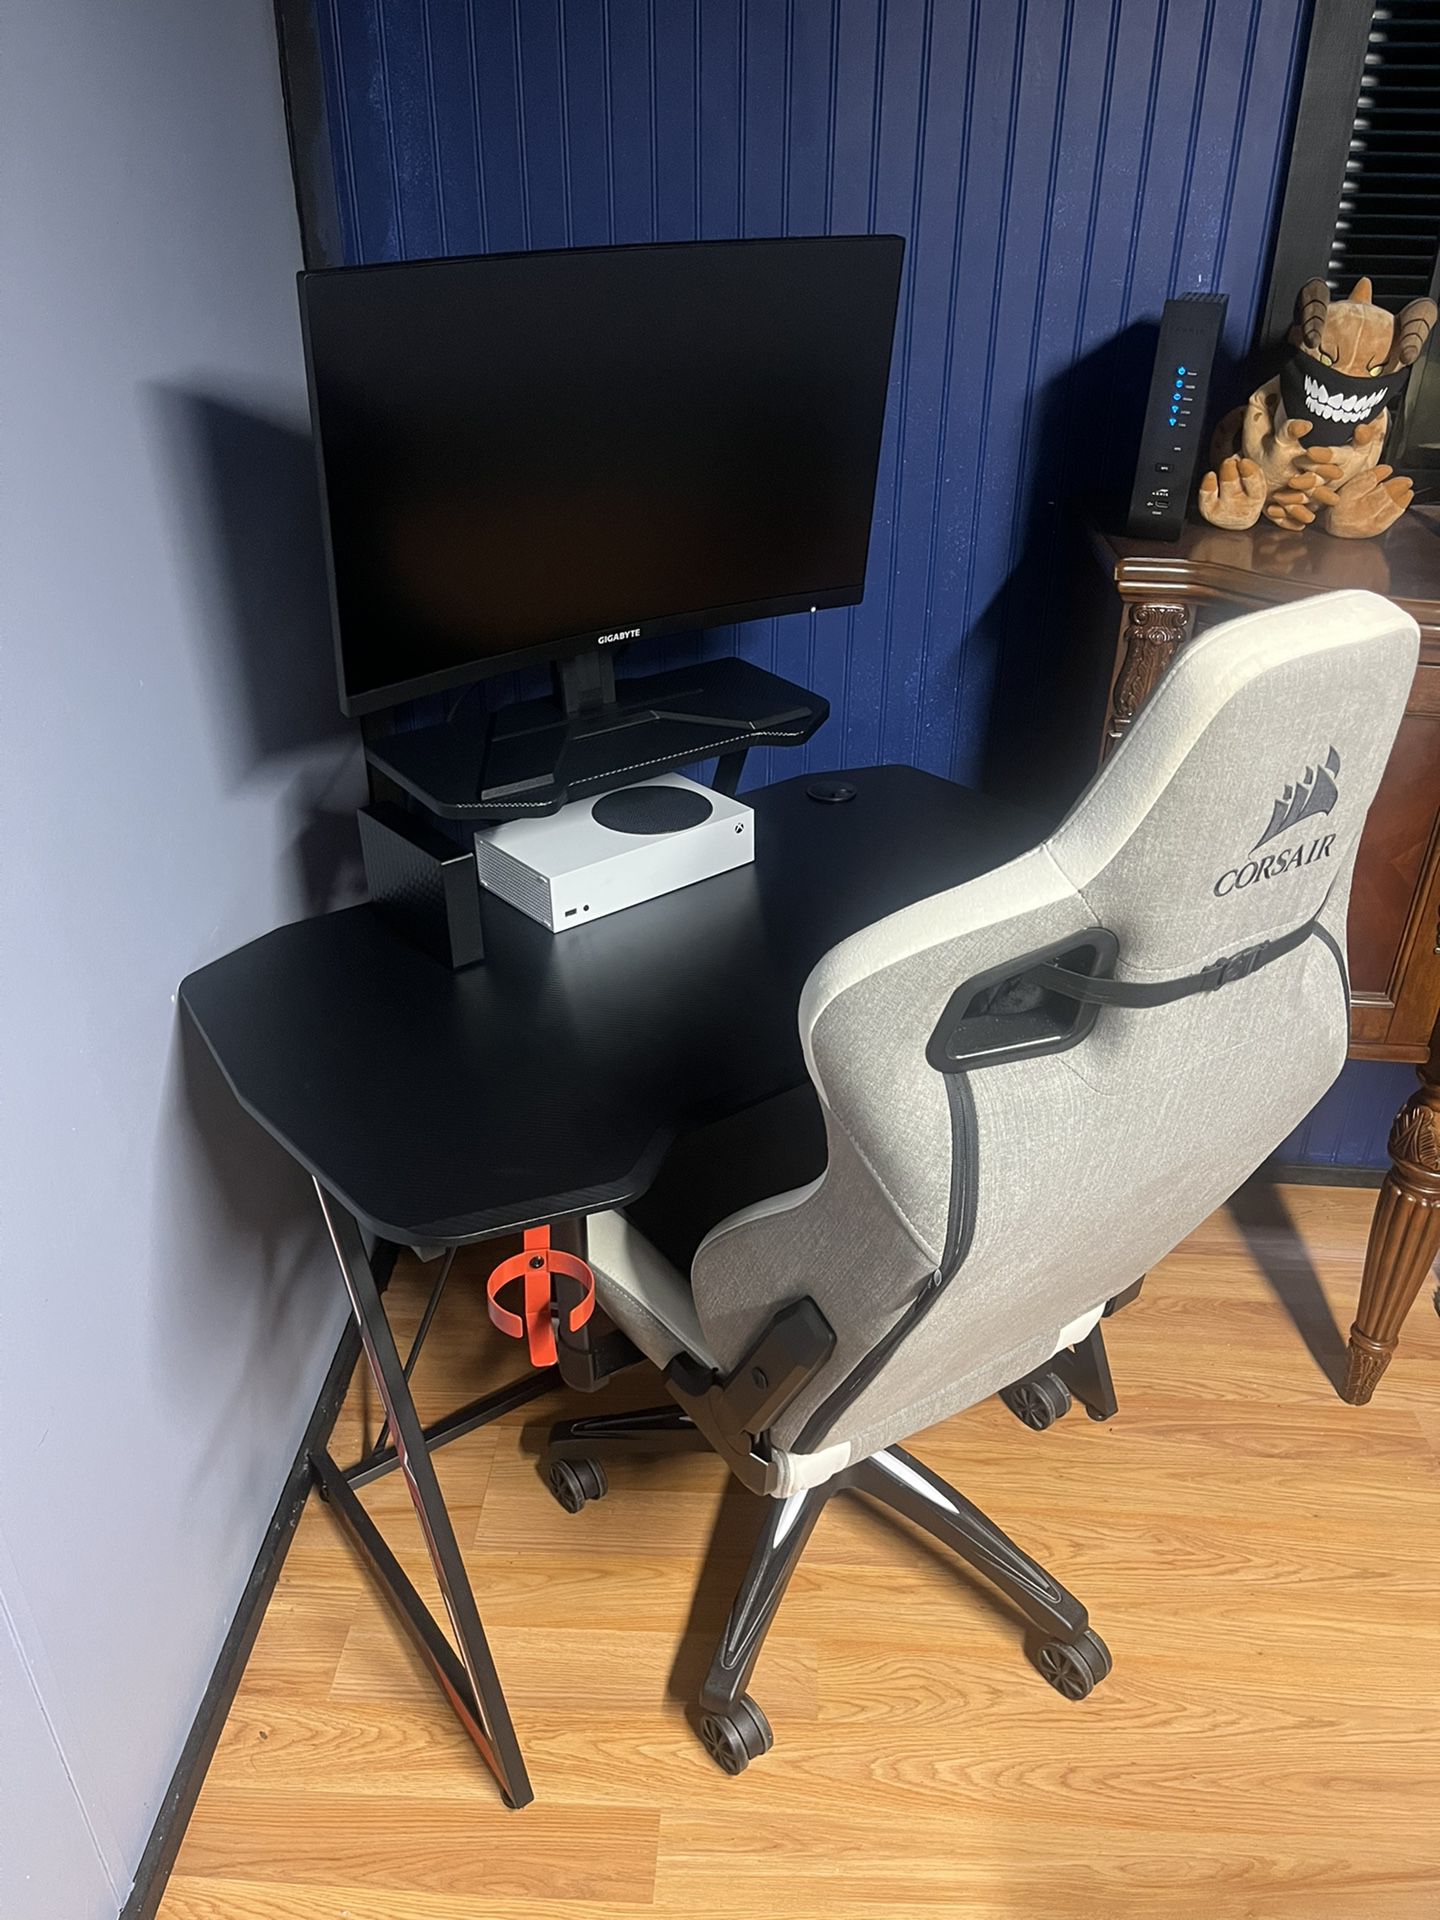 Bundle Setup, Xbox Series S, Gaming Desk, Gaming Curved Screen, 2TB External Storage, 3 Controllers, Chair for Sale in Nicholson, GA - OfferUp